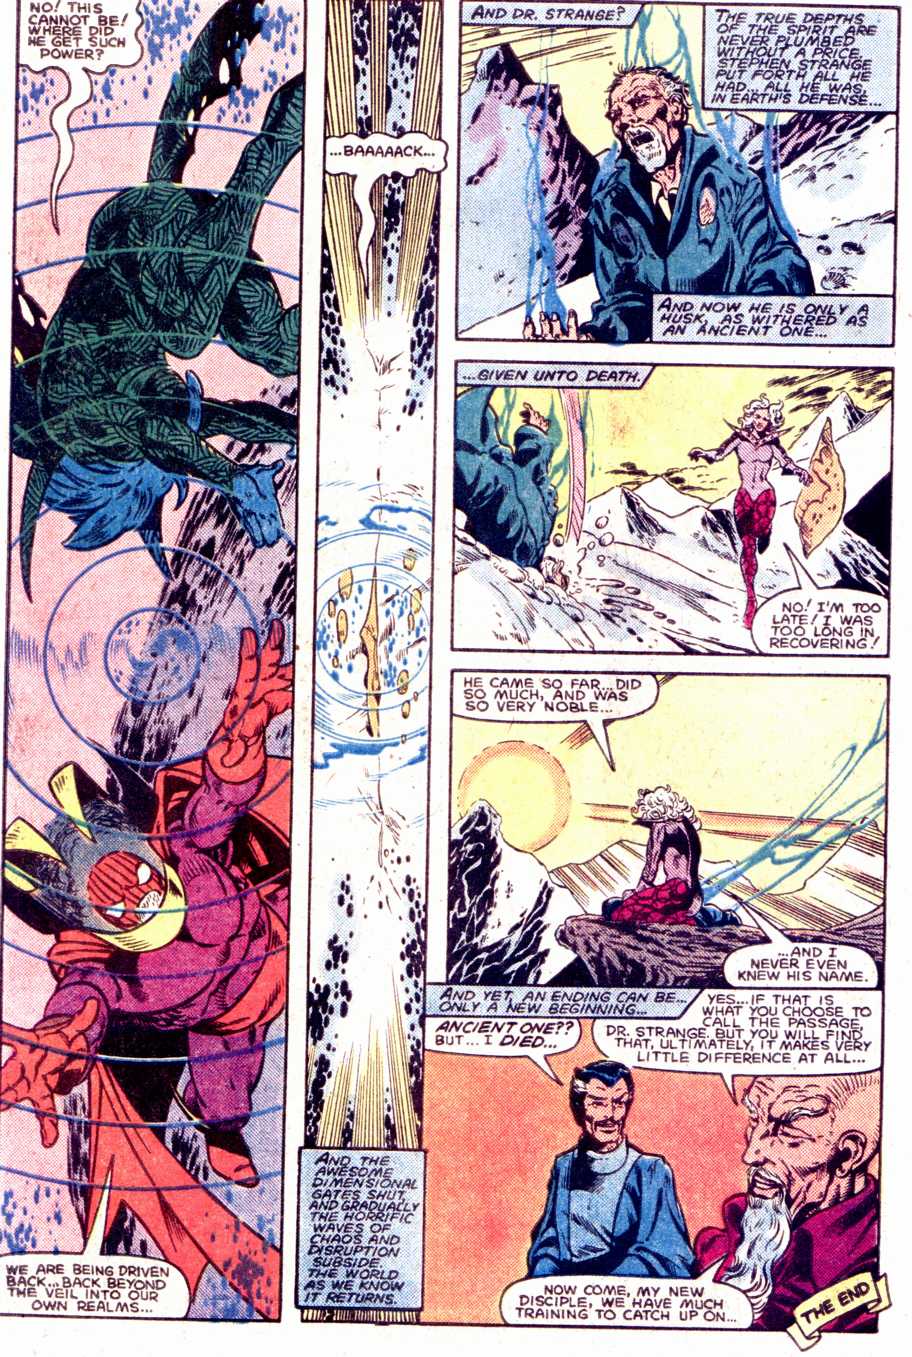 <{ $series->title }} issue 40 - Dr Strange had not become master of The mystic arts - Page 41